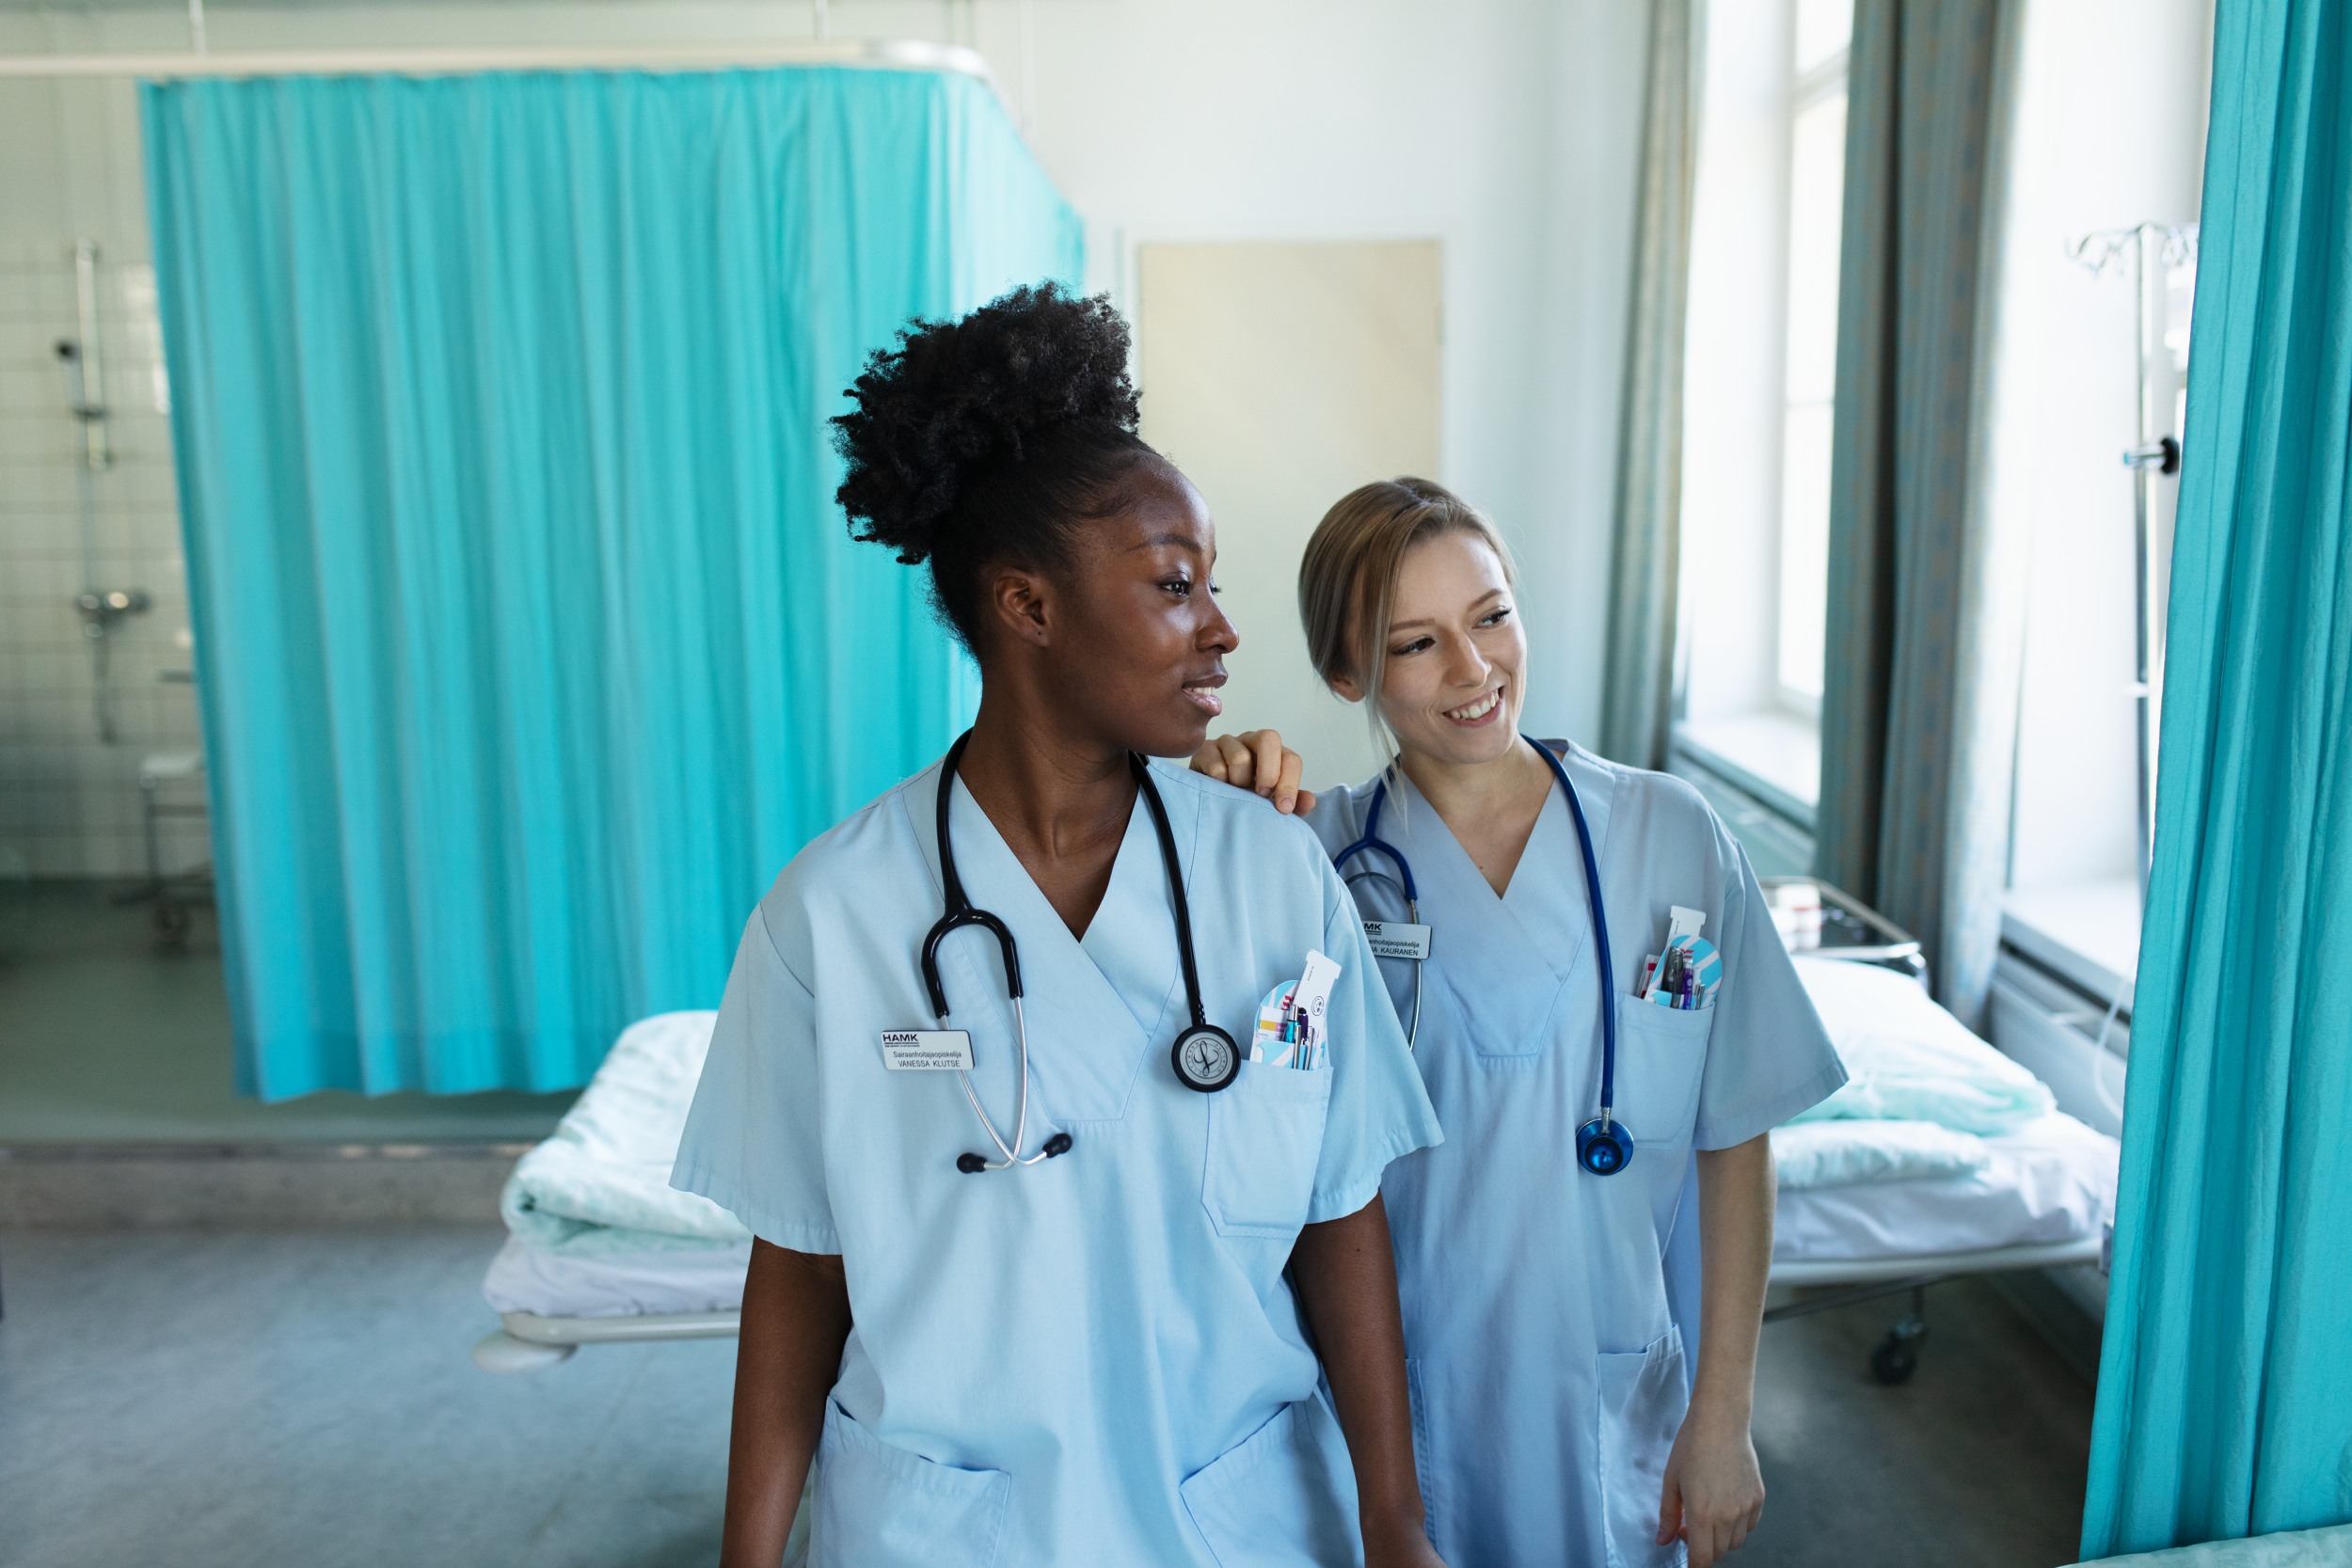 Two nurse students standing side-by-side.